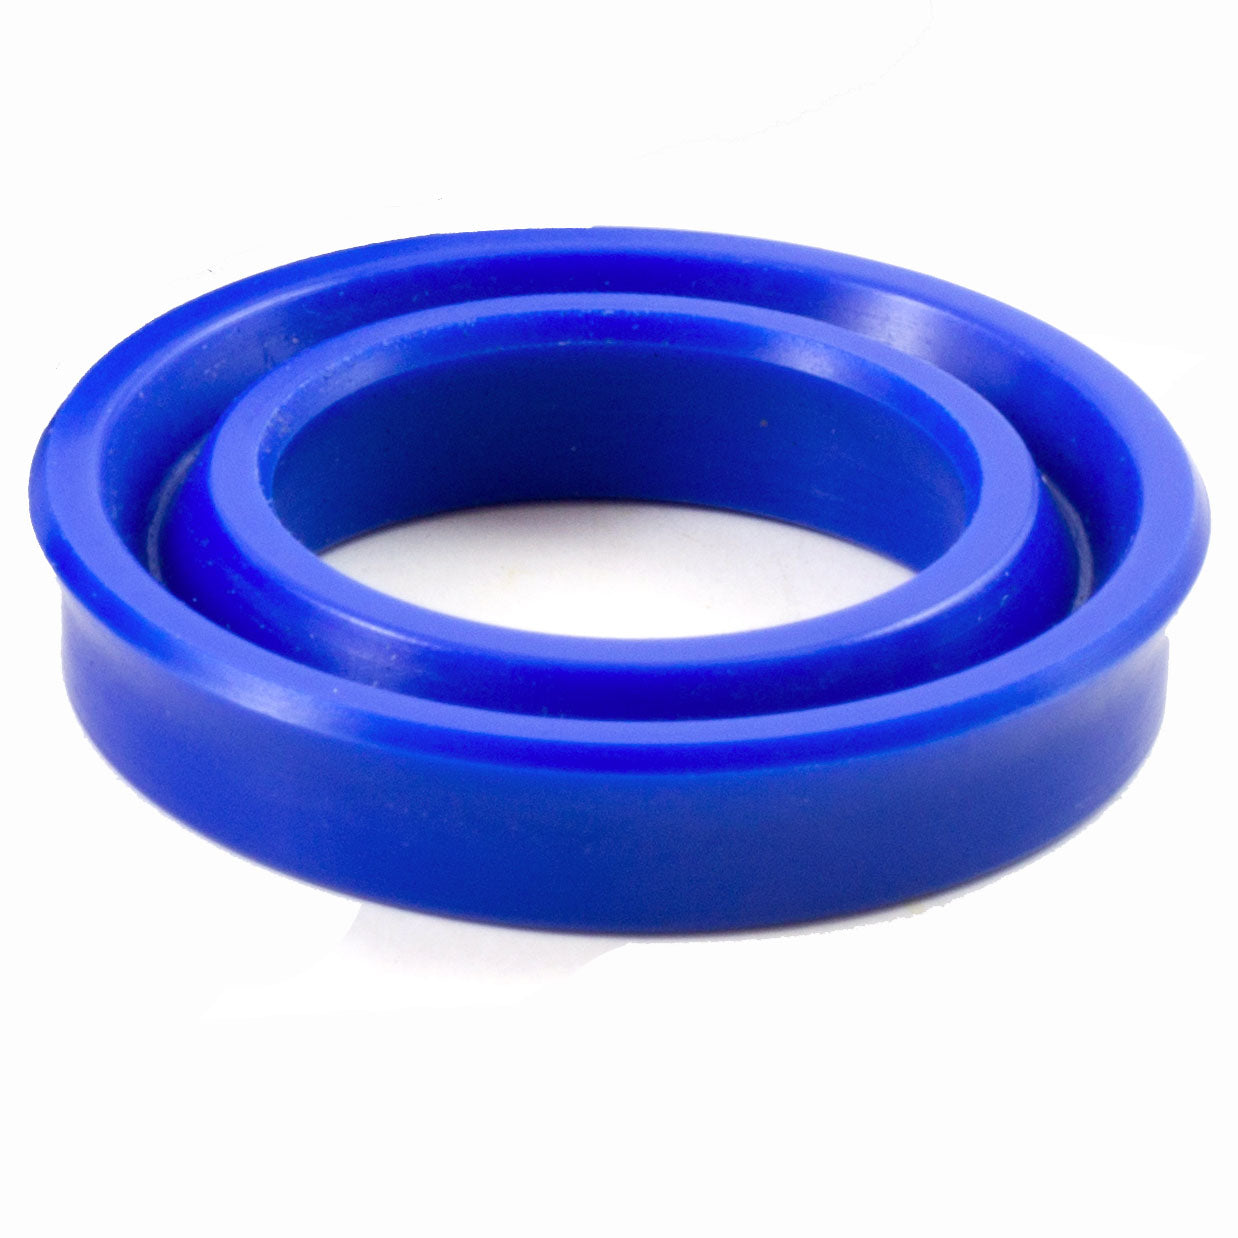 Hydraulic Rod Seals 4mm x 10mm x 4mm U-Cup Large range of sizes available UN Type 